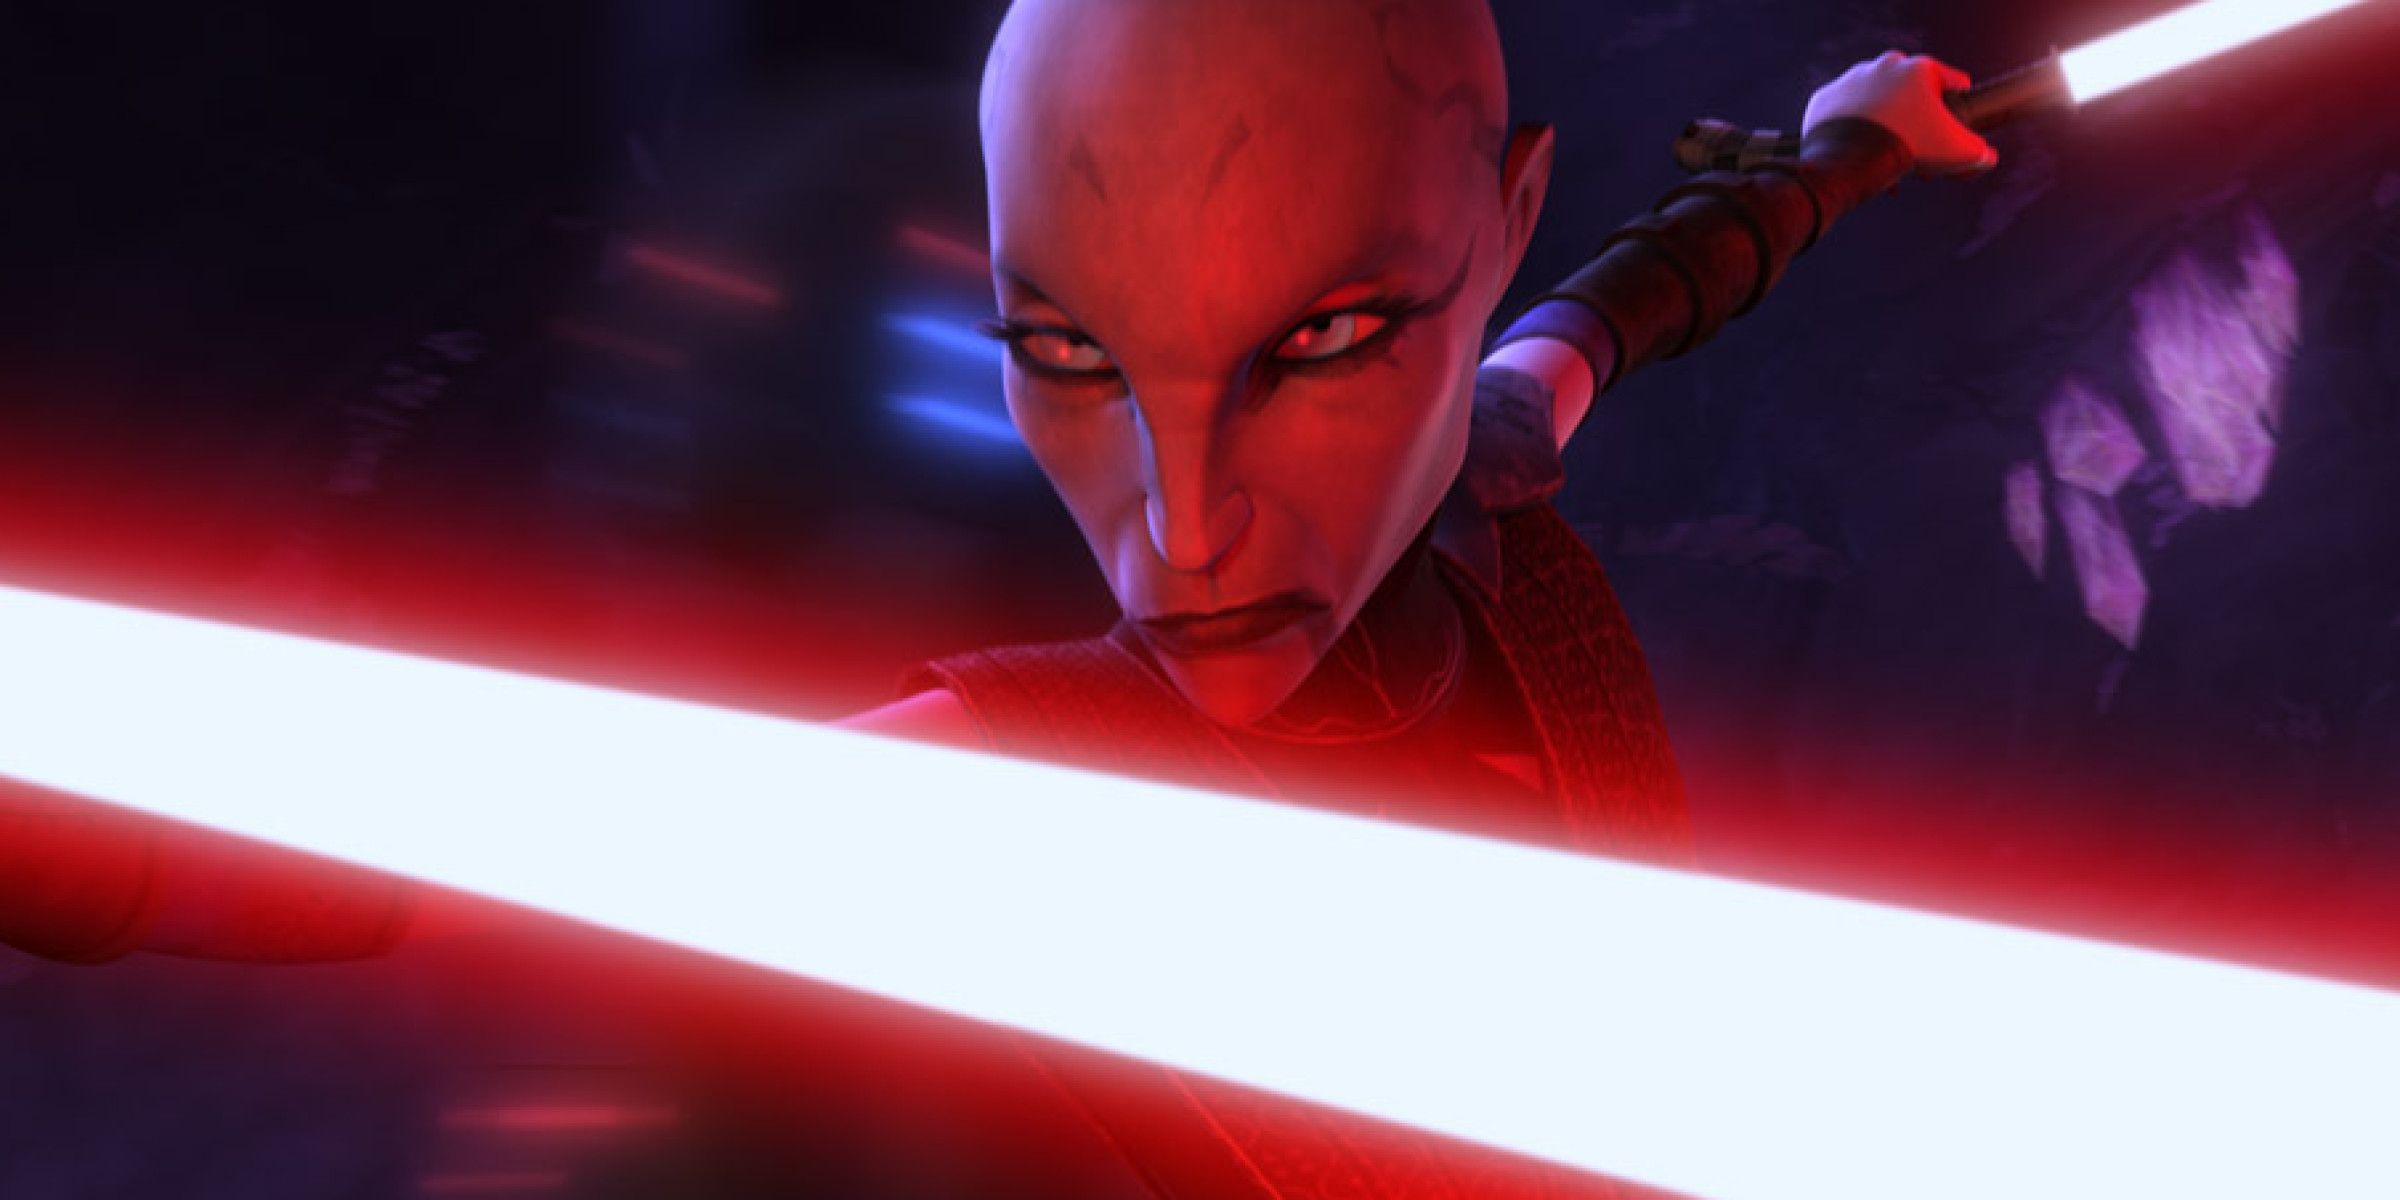 Asajj Ventress with her dual lightsabers